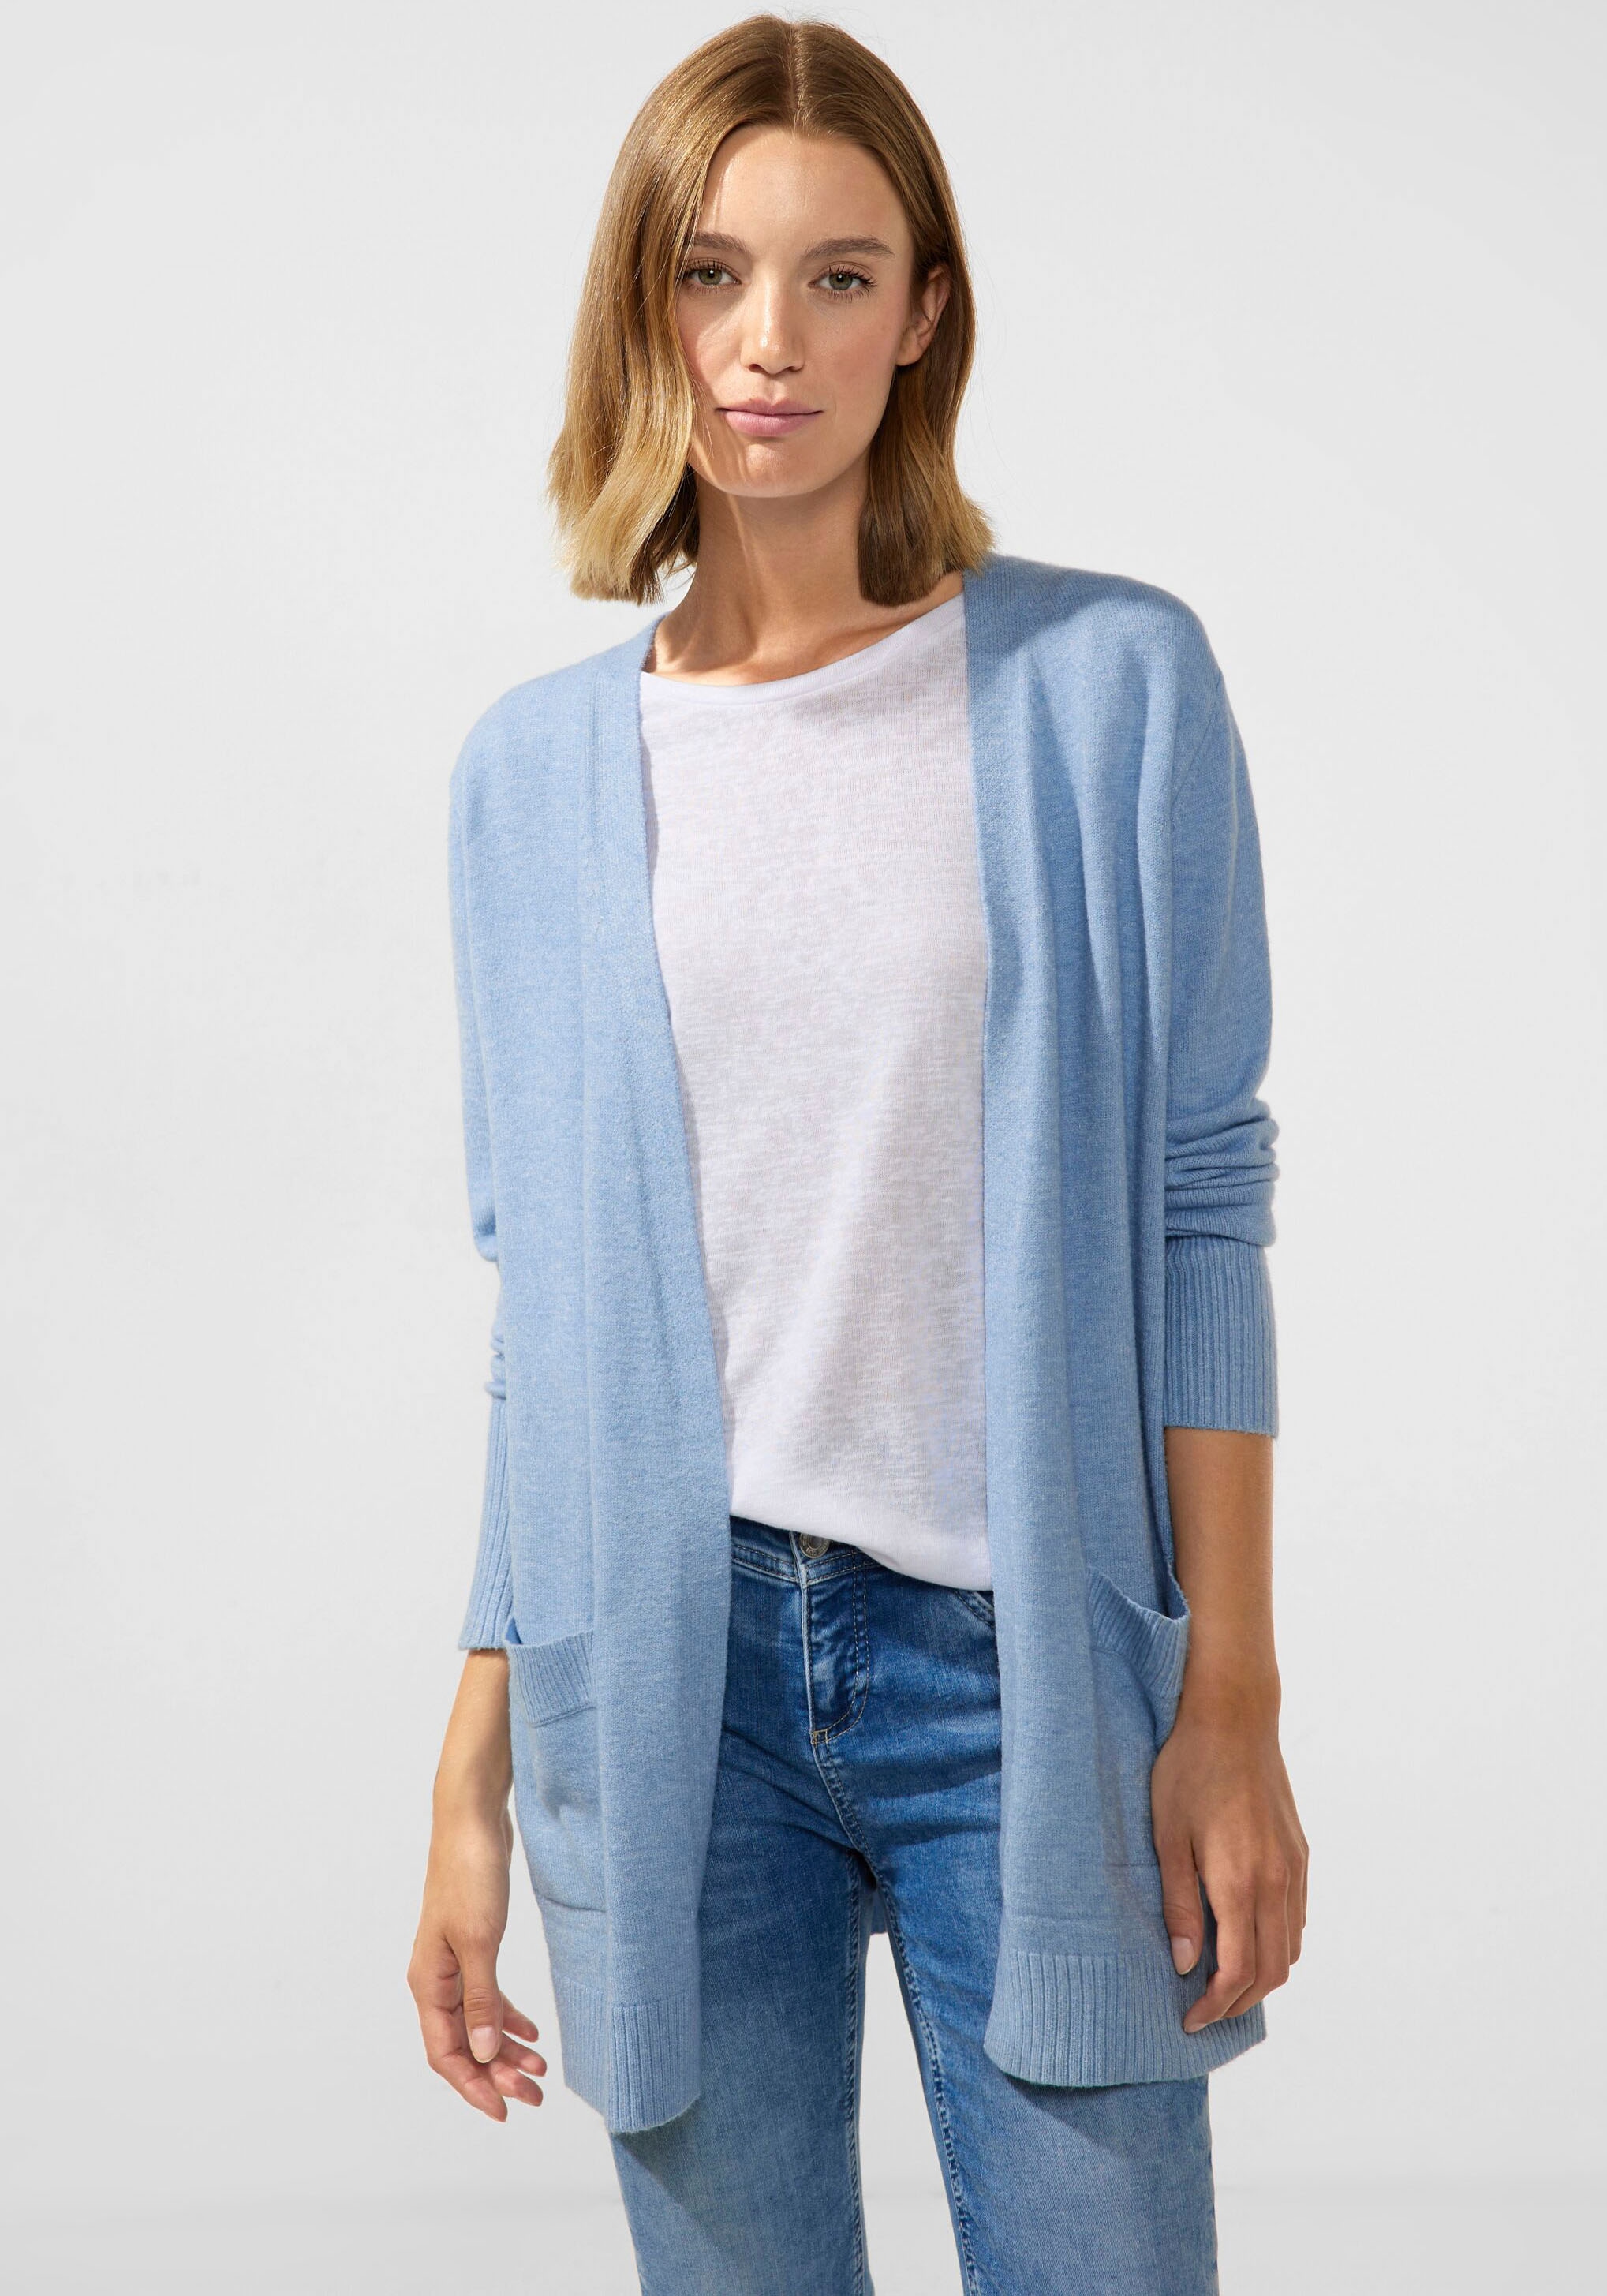 bei STREET in Unifarbe ONE OTTOversand Cardigan,